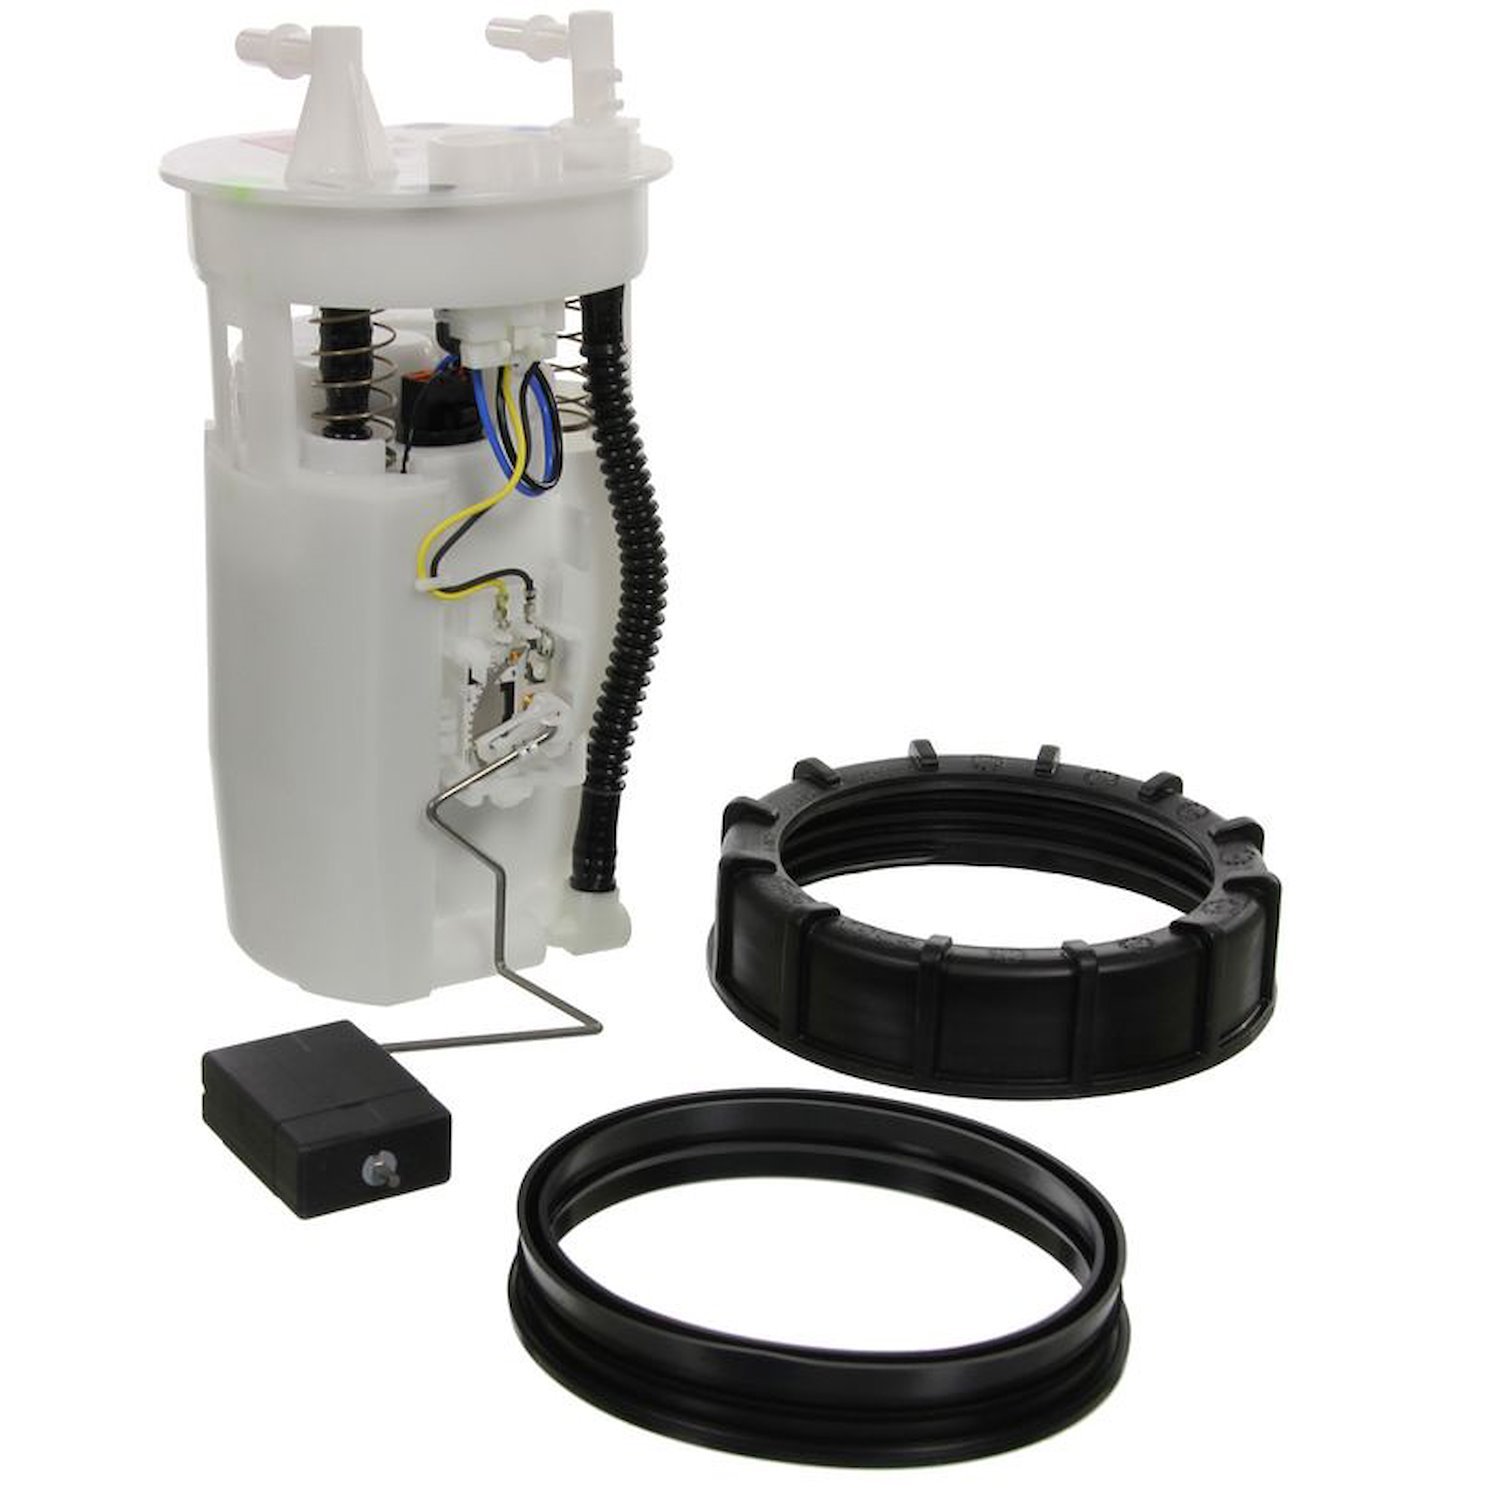 OE Replacement Fuel Pump Module Assembly for 1999-2004 Honda Odyssey